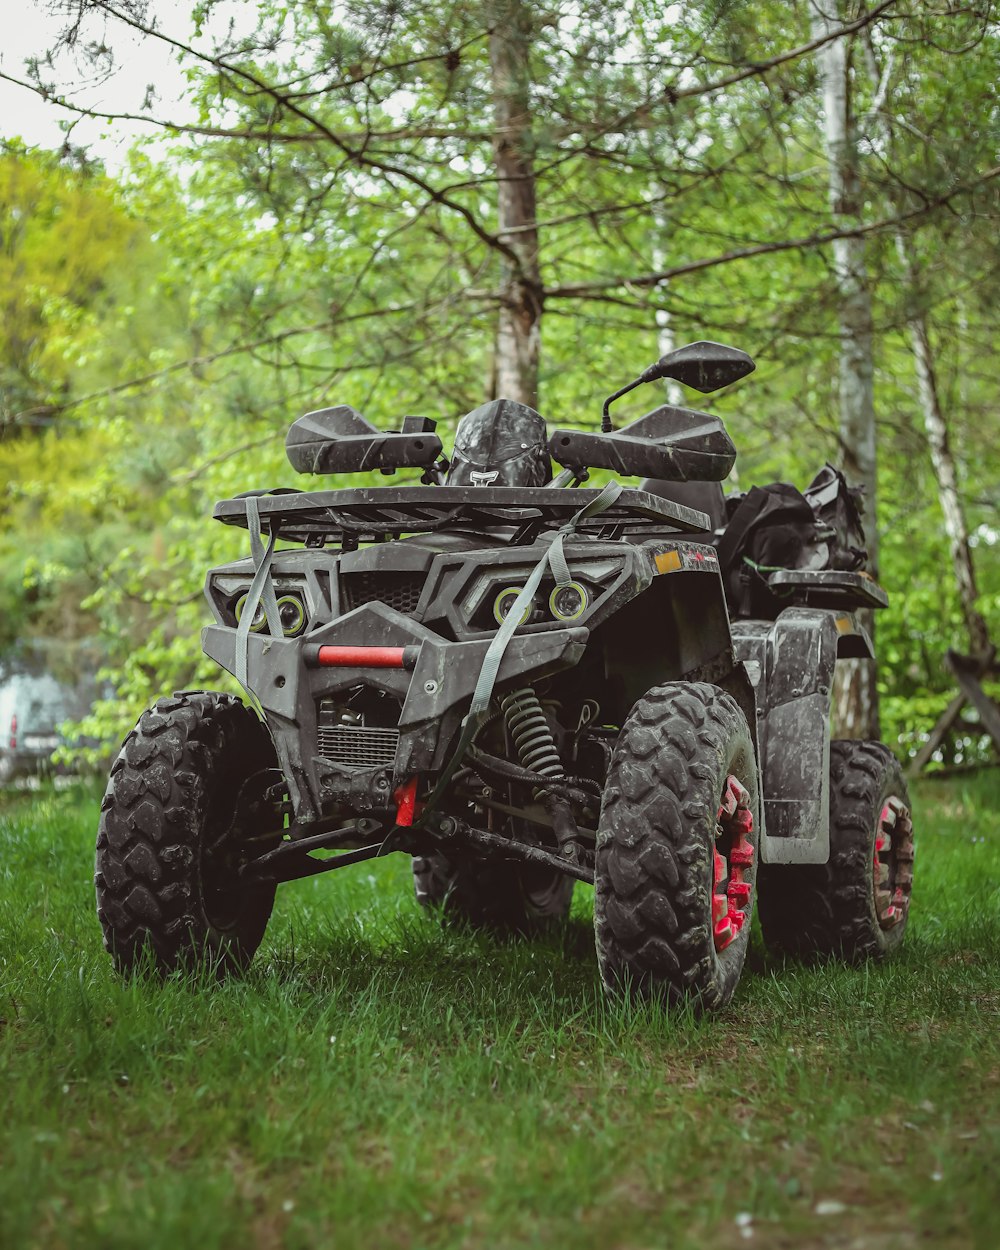 a four - wheeler is parked in the grass near a tree